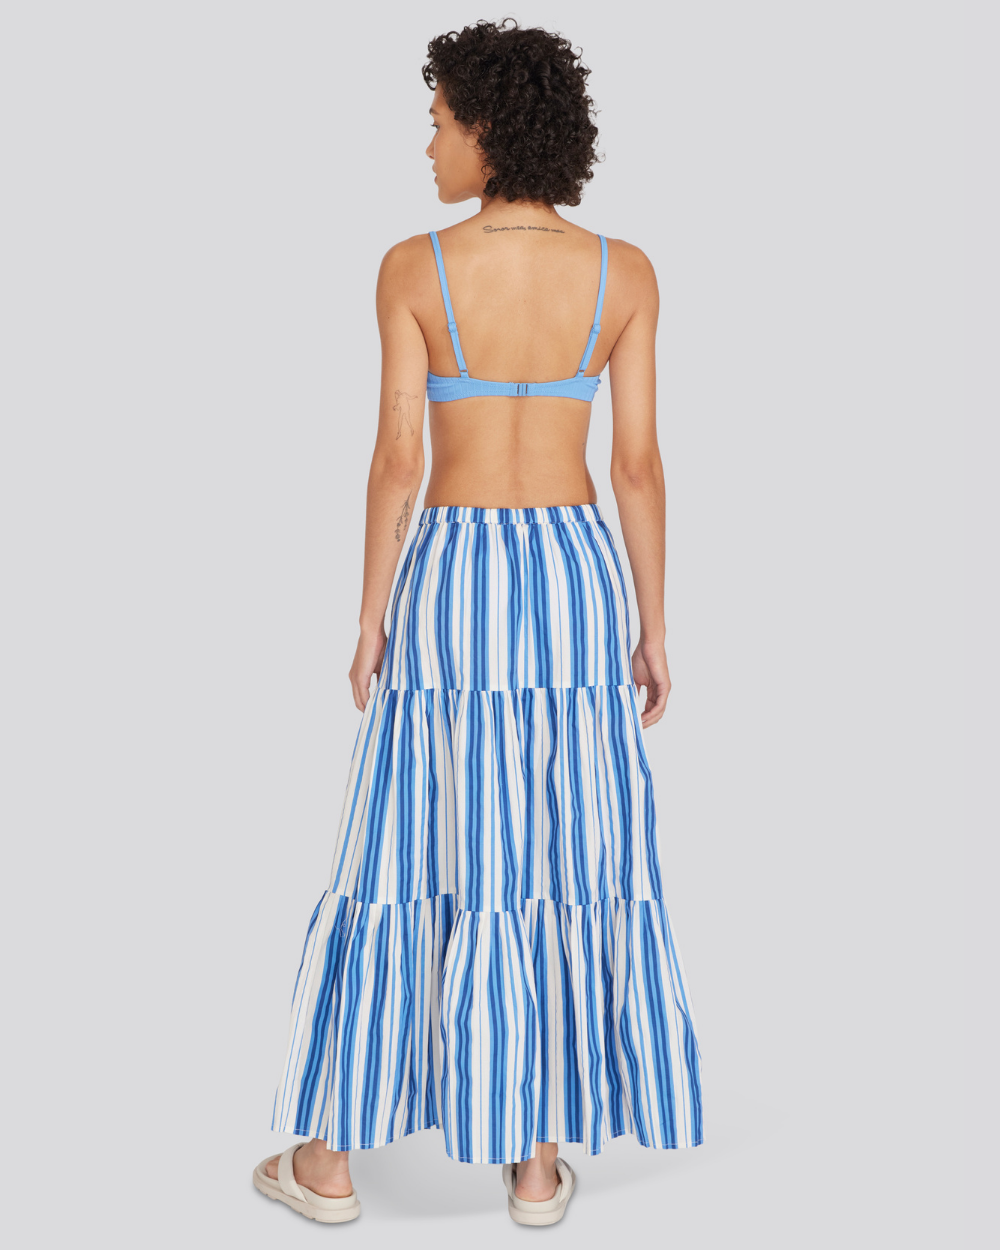 The Addison Skirt - Solid & Striped